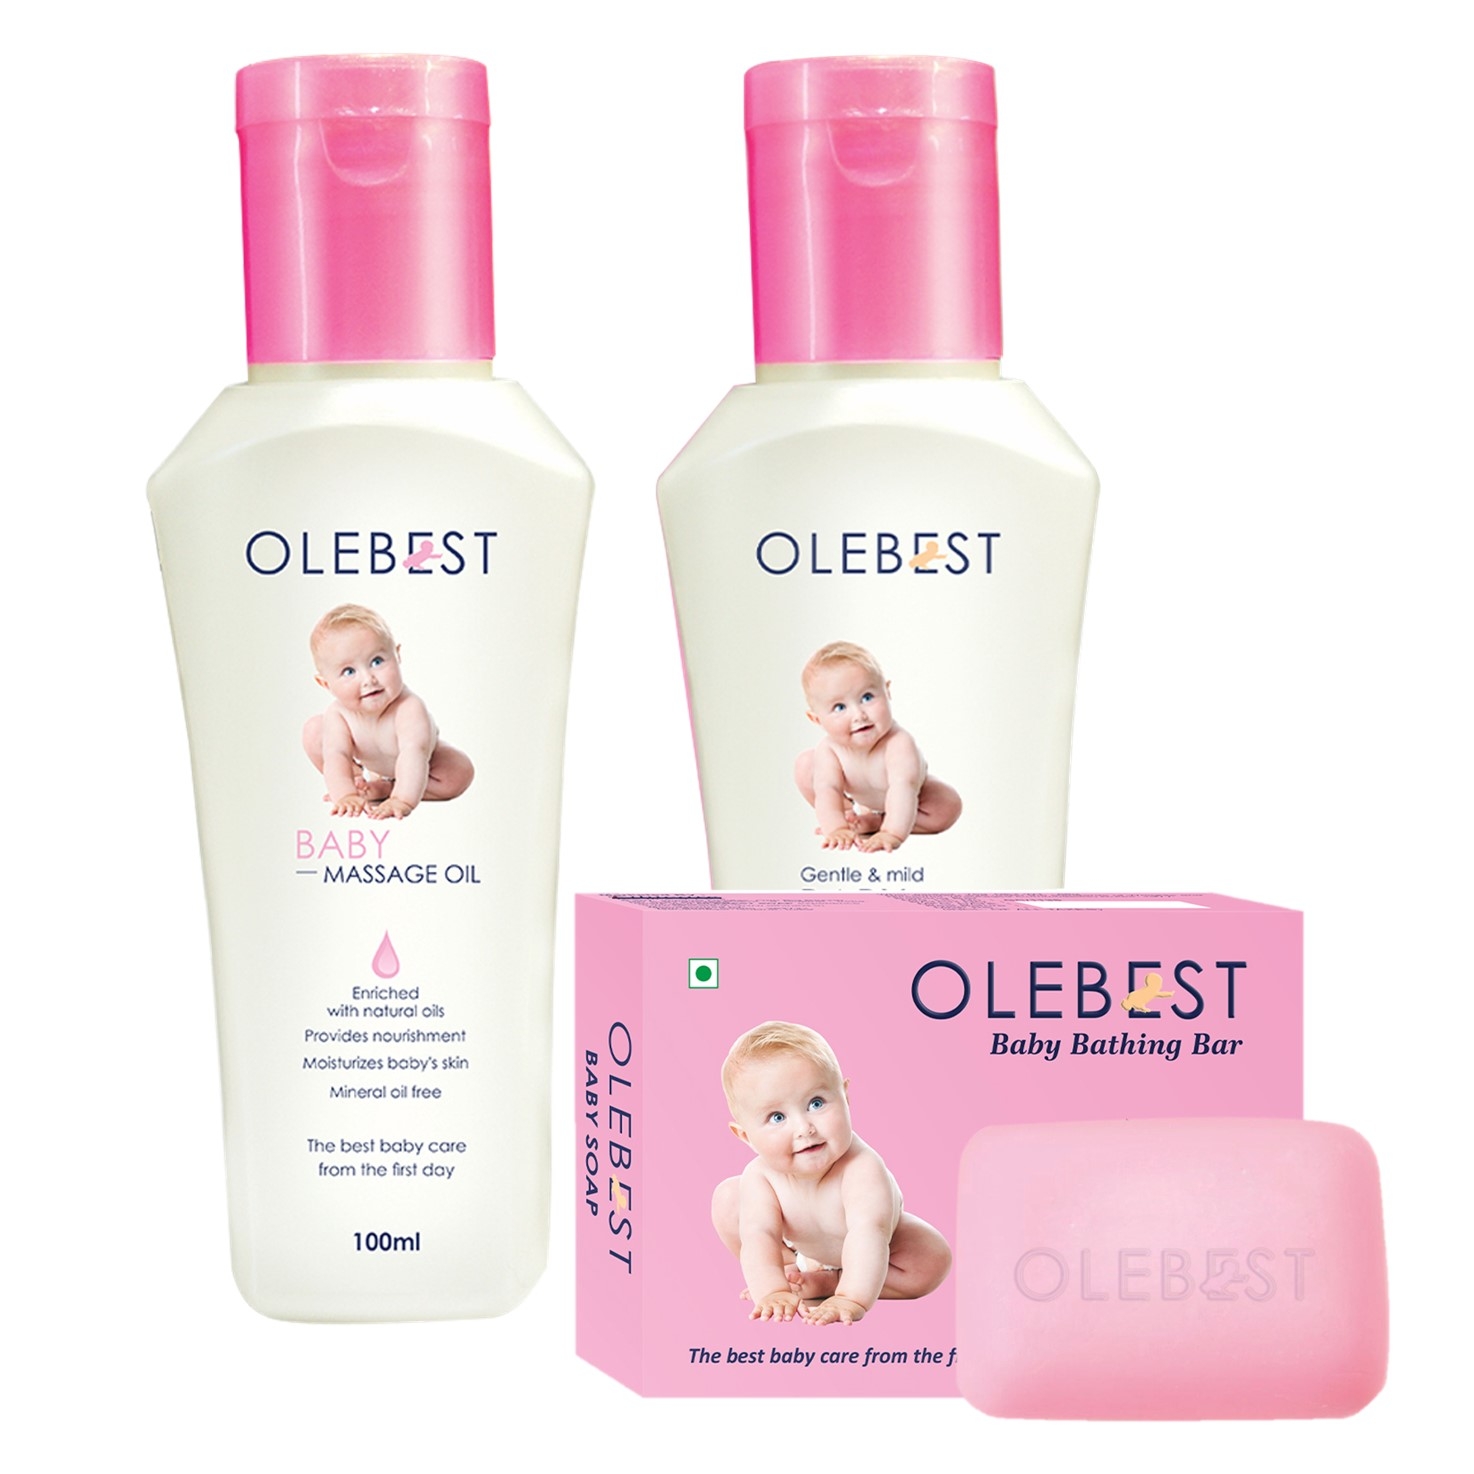 OLEBEST | Olebest - The Complete Baby Care Kit | Olebest baby soap-68gm,Olebest Baby shampoo-100ml and Olebest baby massage oil-100ml